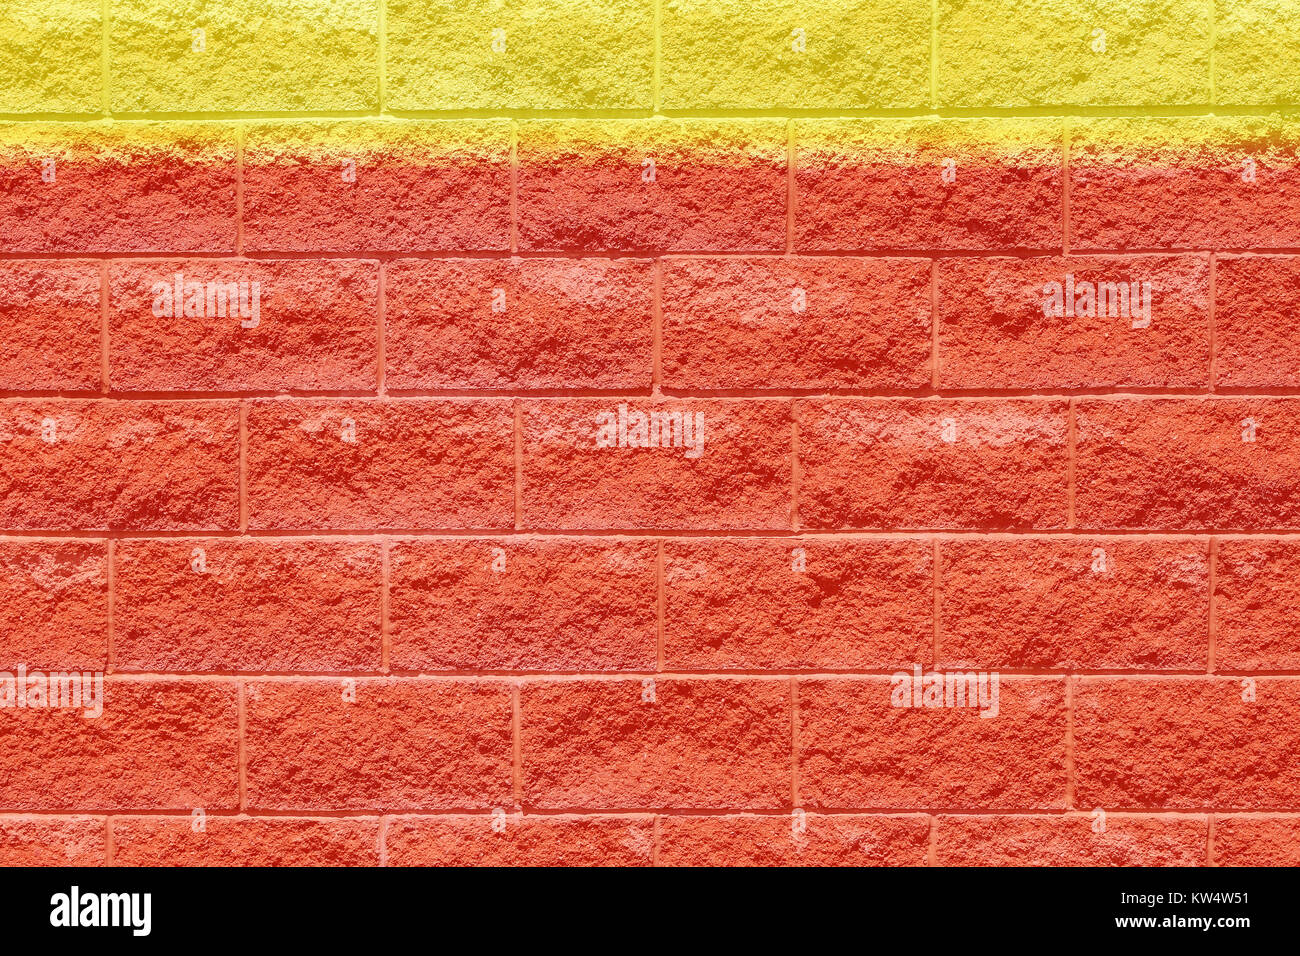 Red brick wall with abstract yellow strip of painted color along top Stock Photo